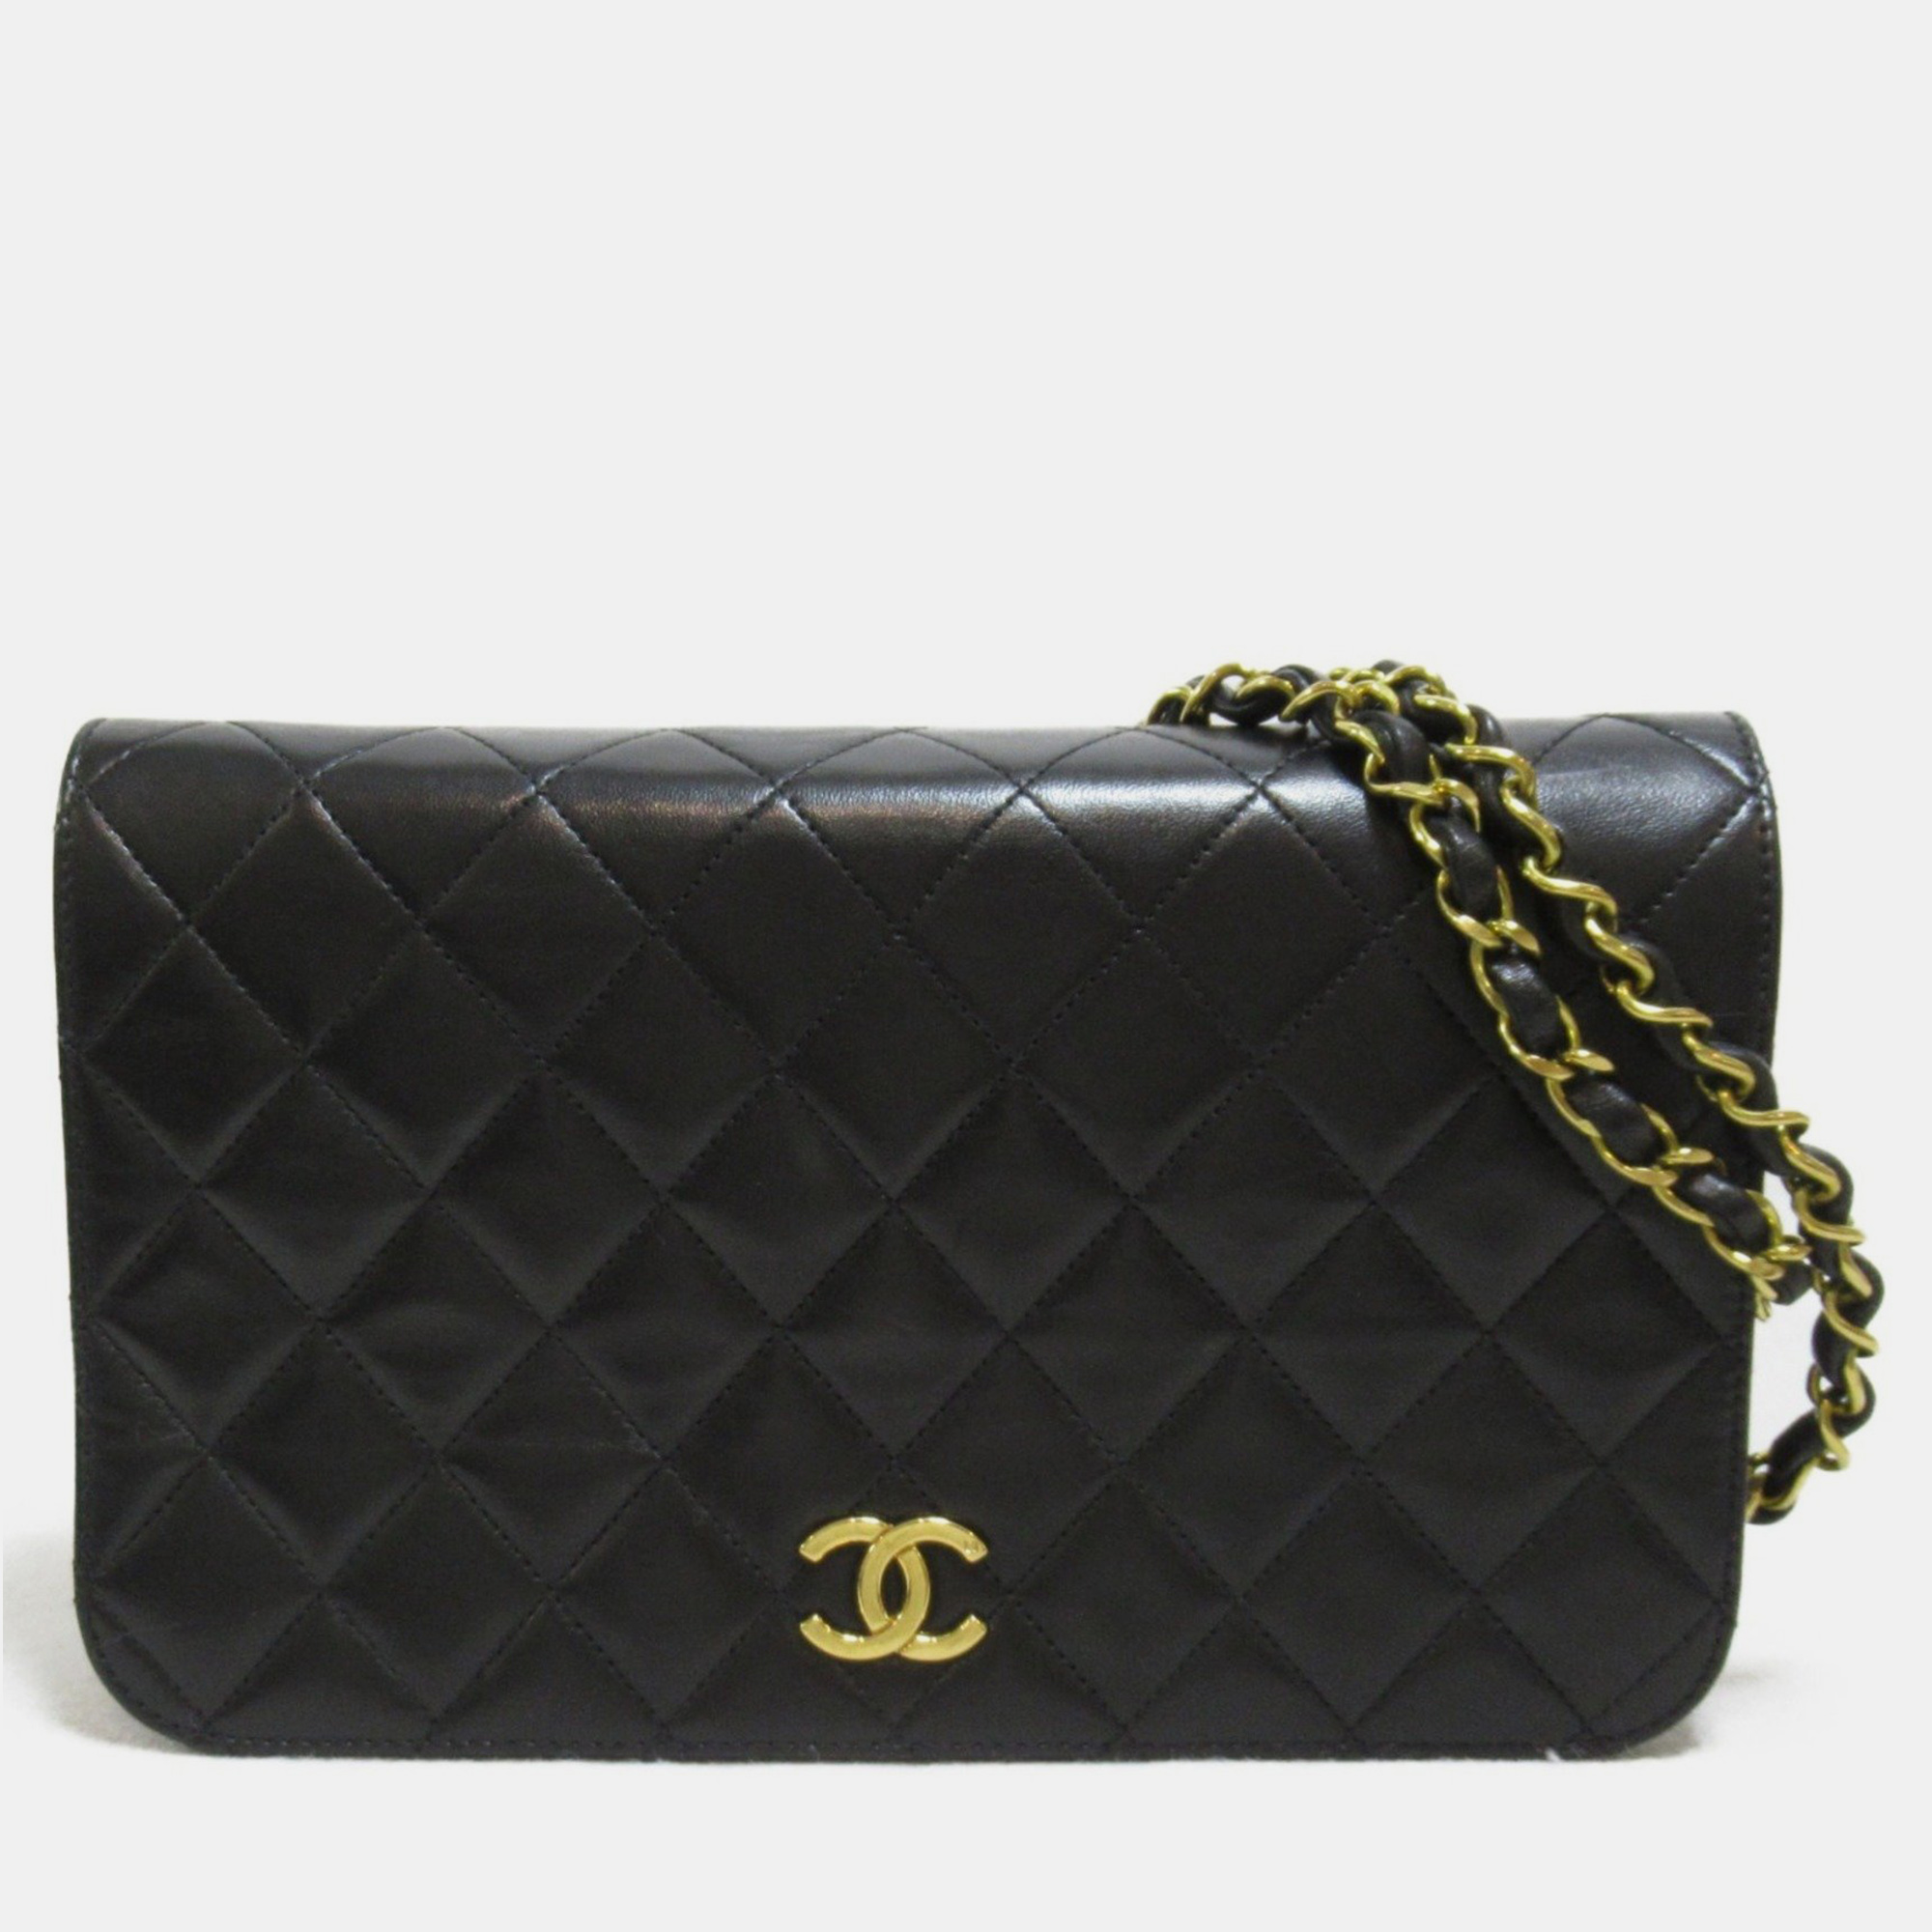 Chanel black quilted lambskin leather full flap bag